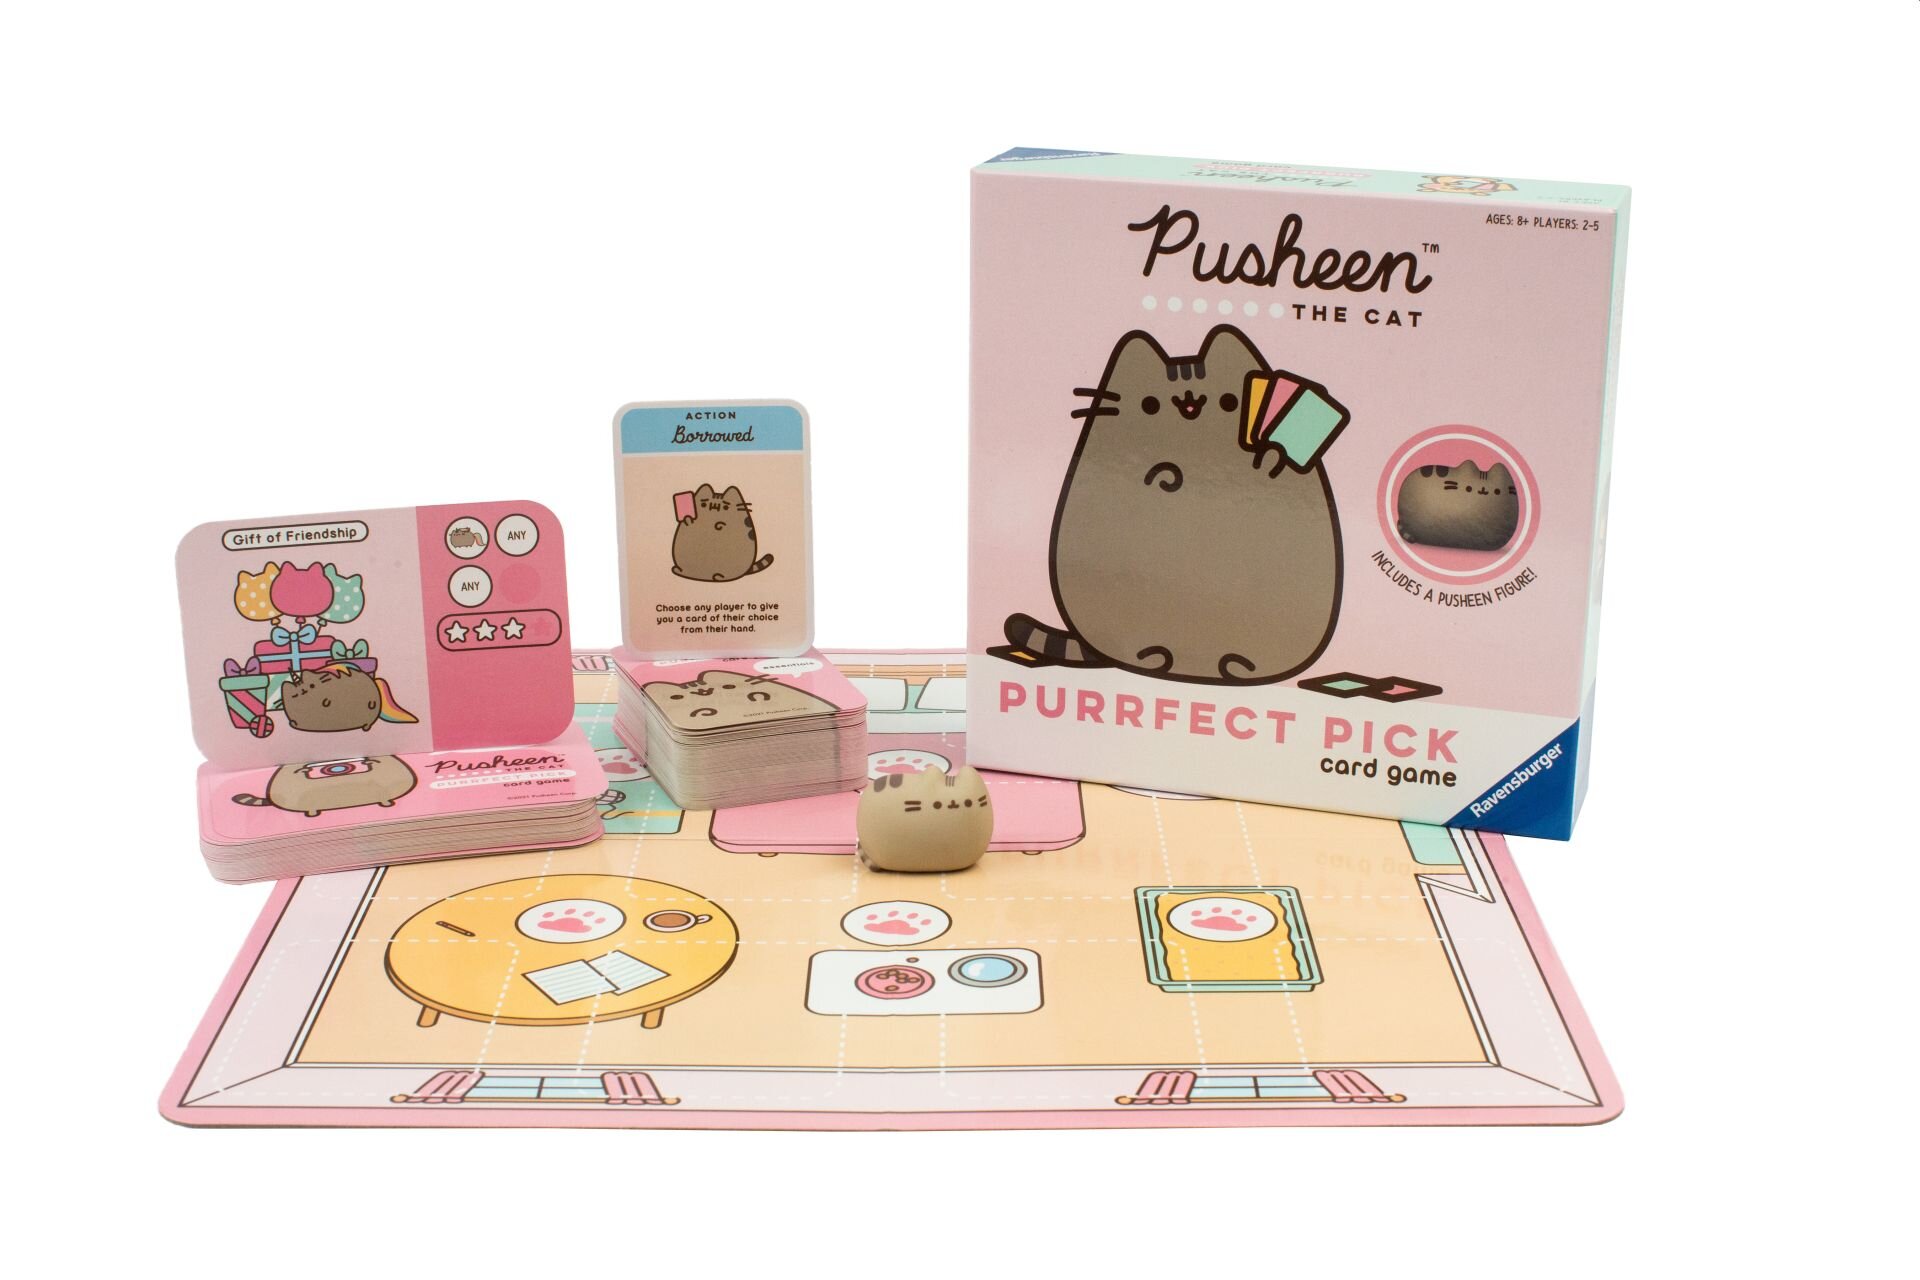 Pusheen the Cat is Getting a Family-Friendly Card Game in PUSHEEN PURRFECT  PICK — GeekTyrant